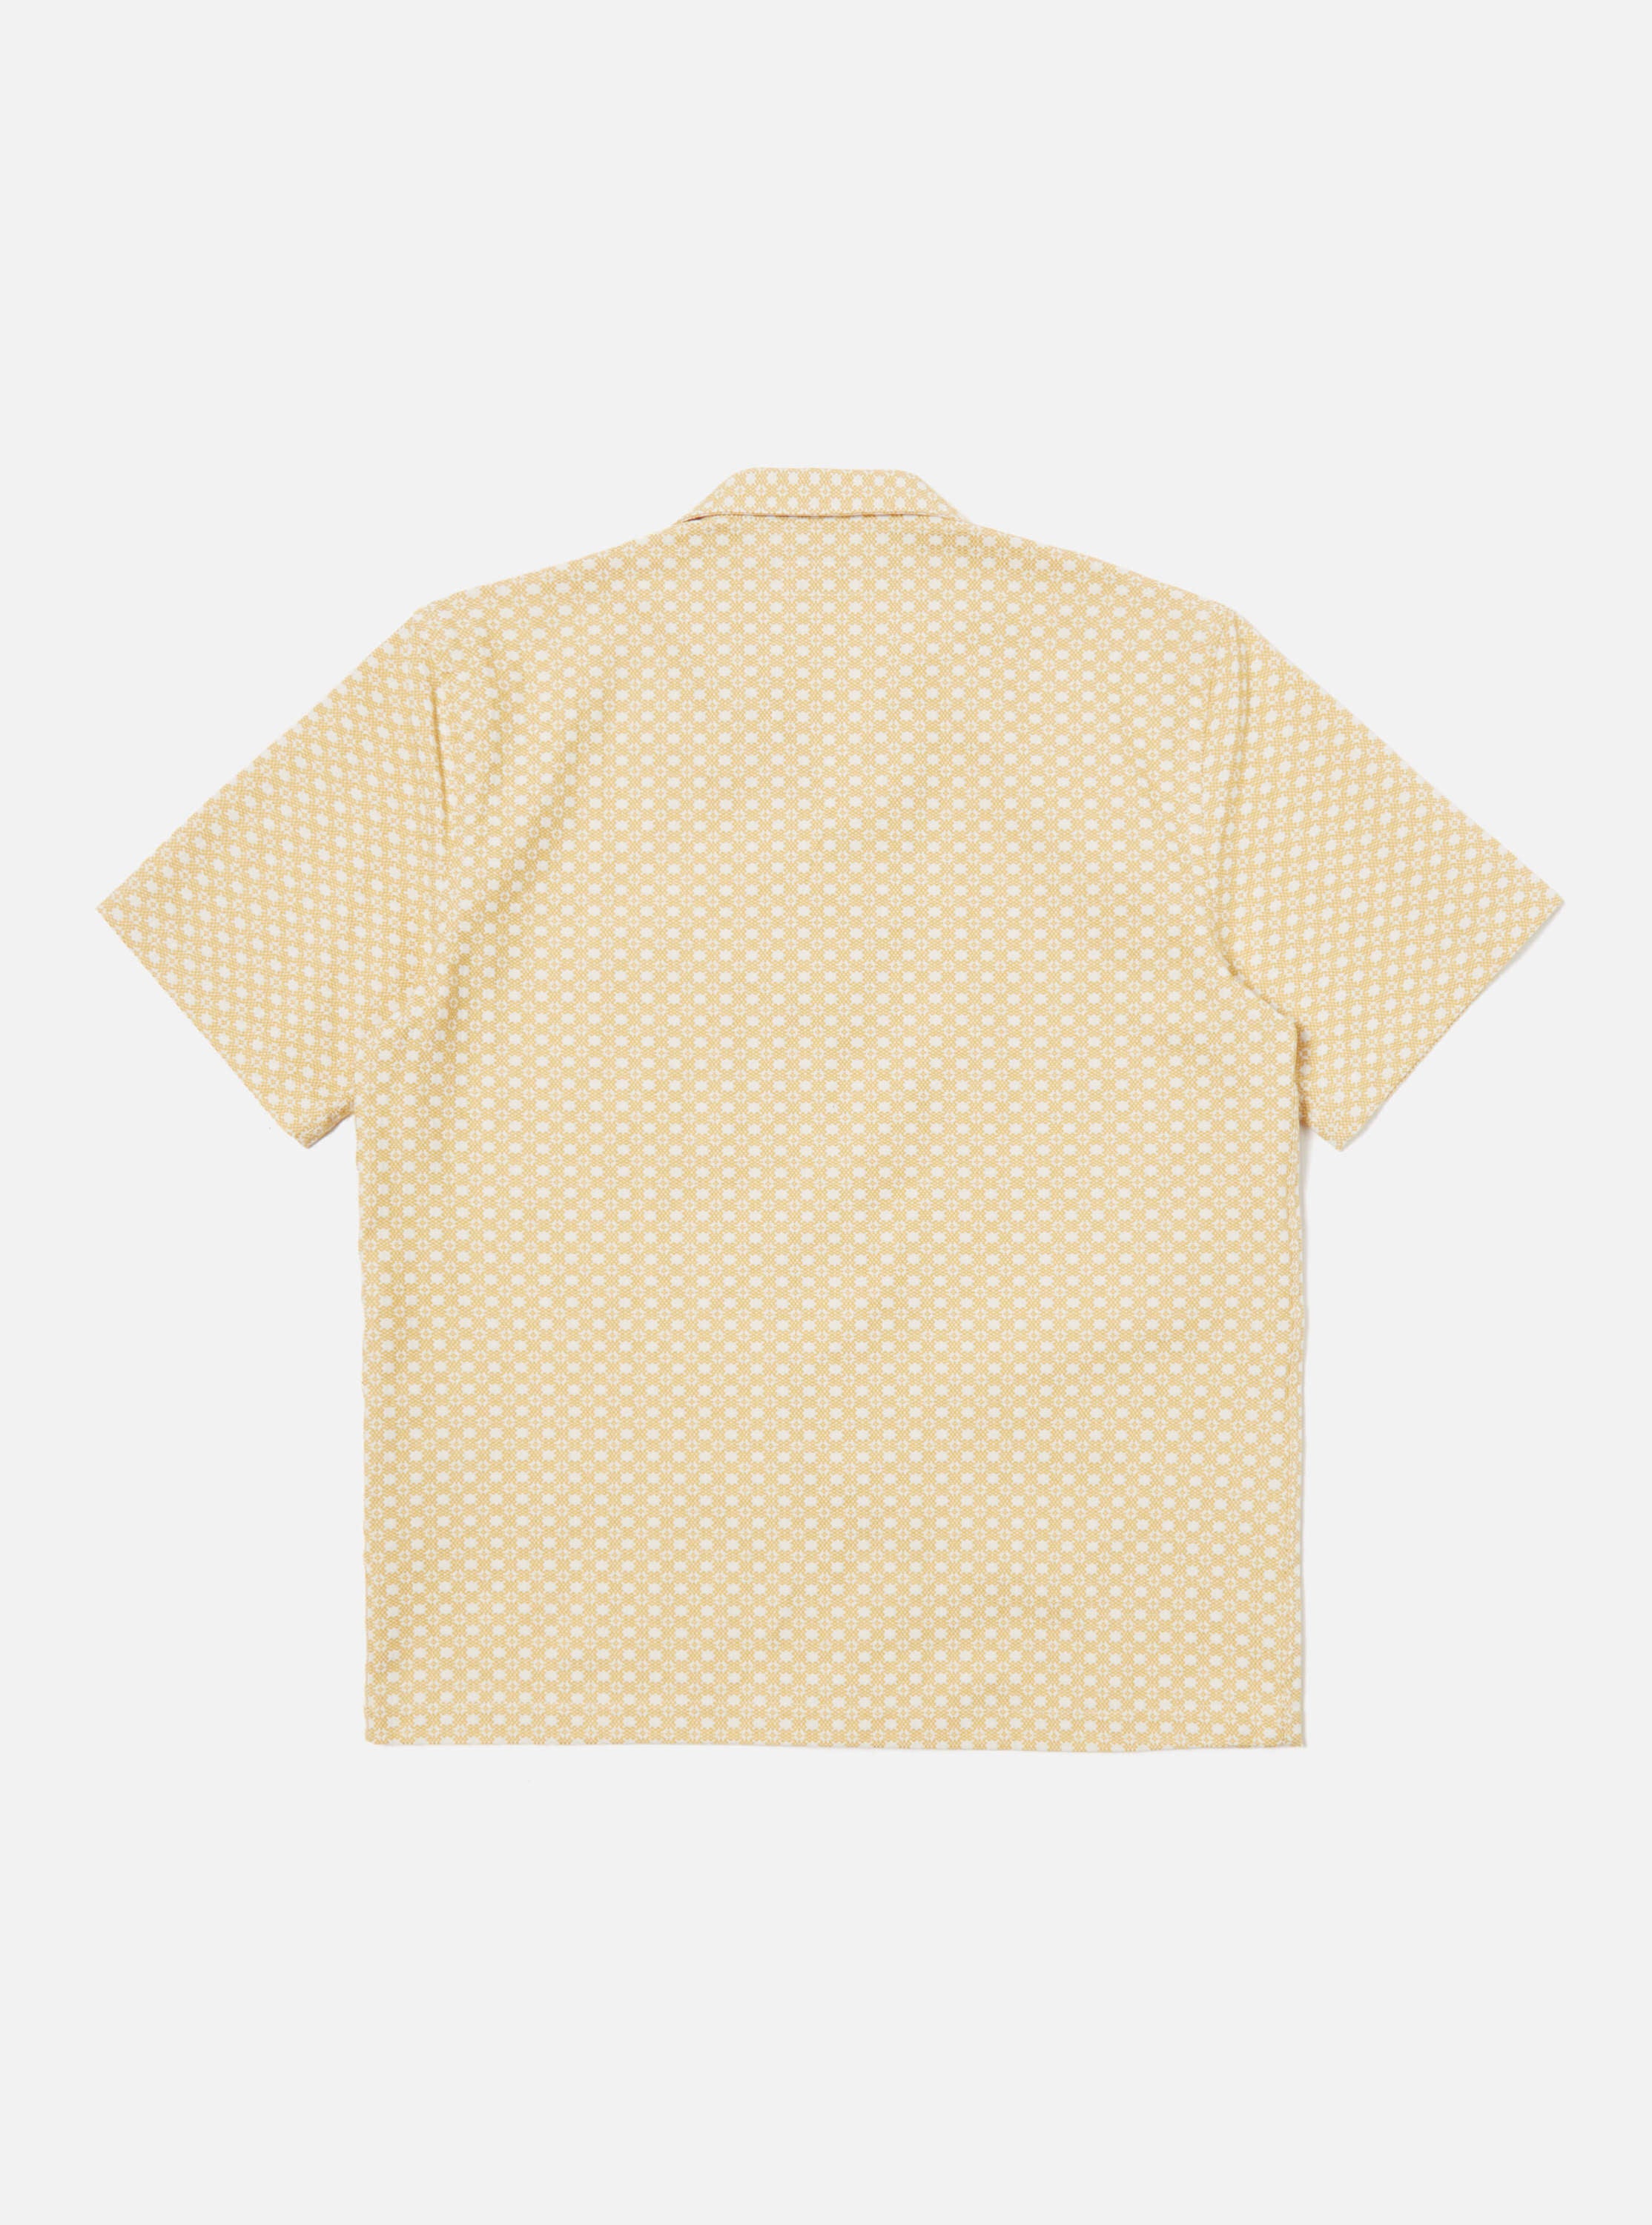 Universal Works Road Shirt in Yellow Tile 3 Cotton